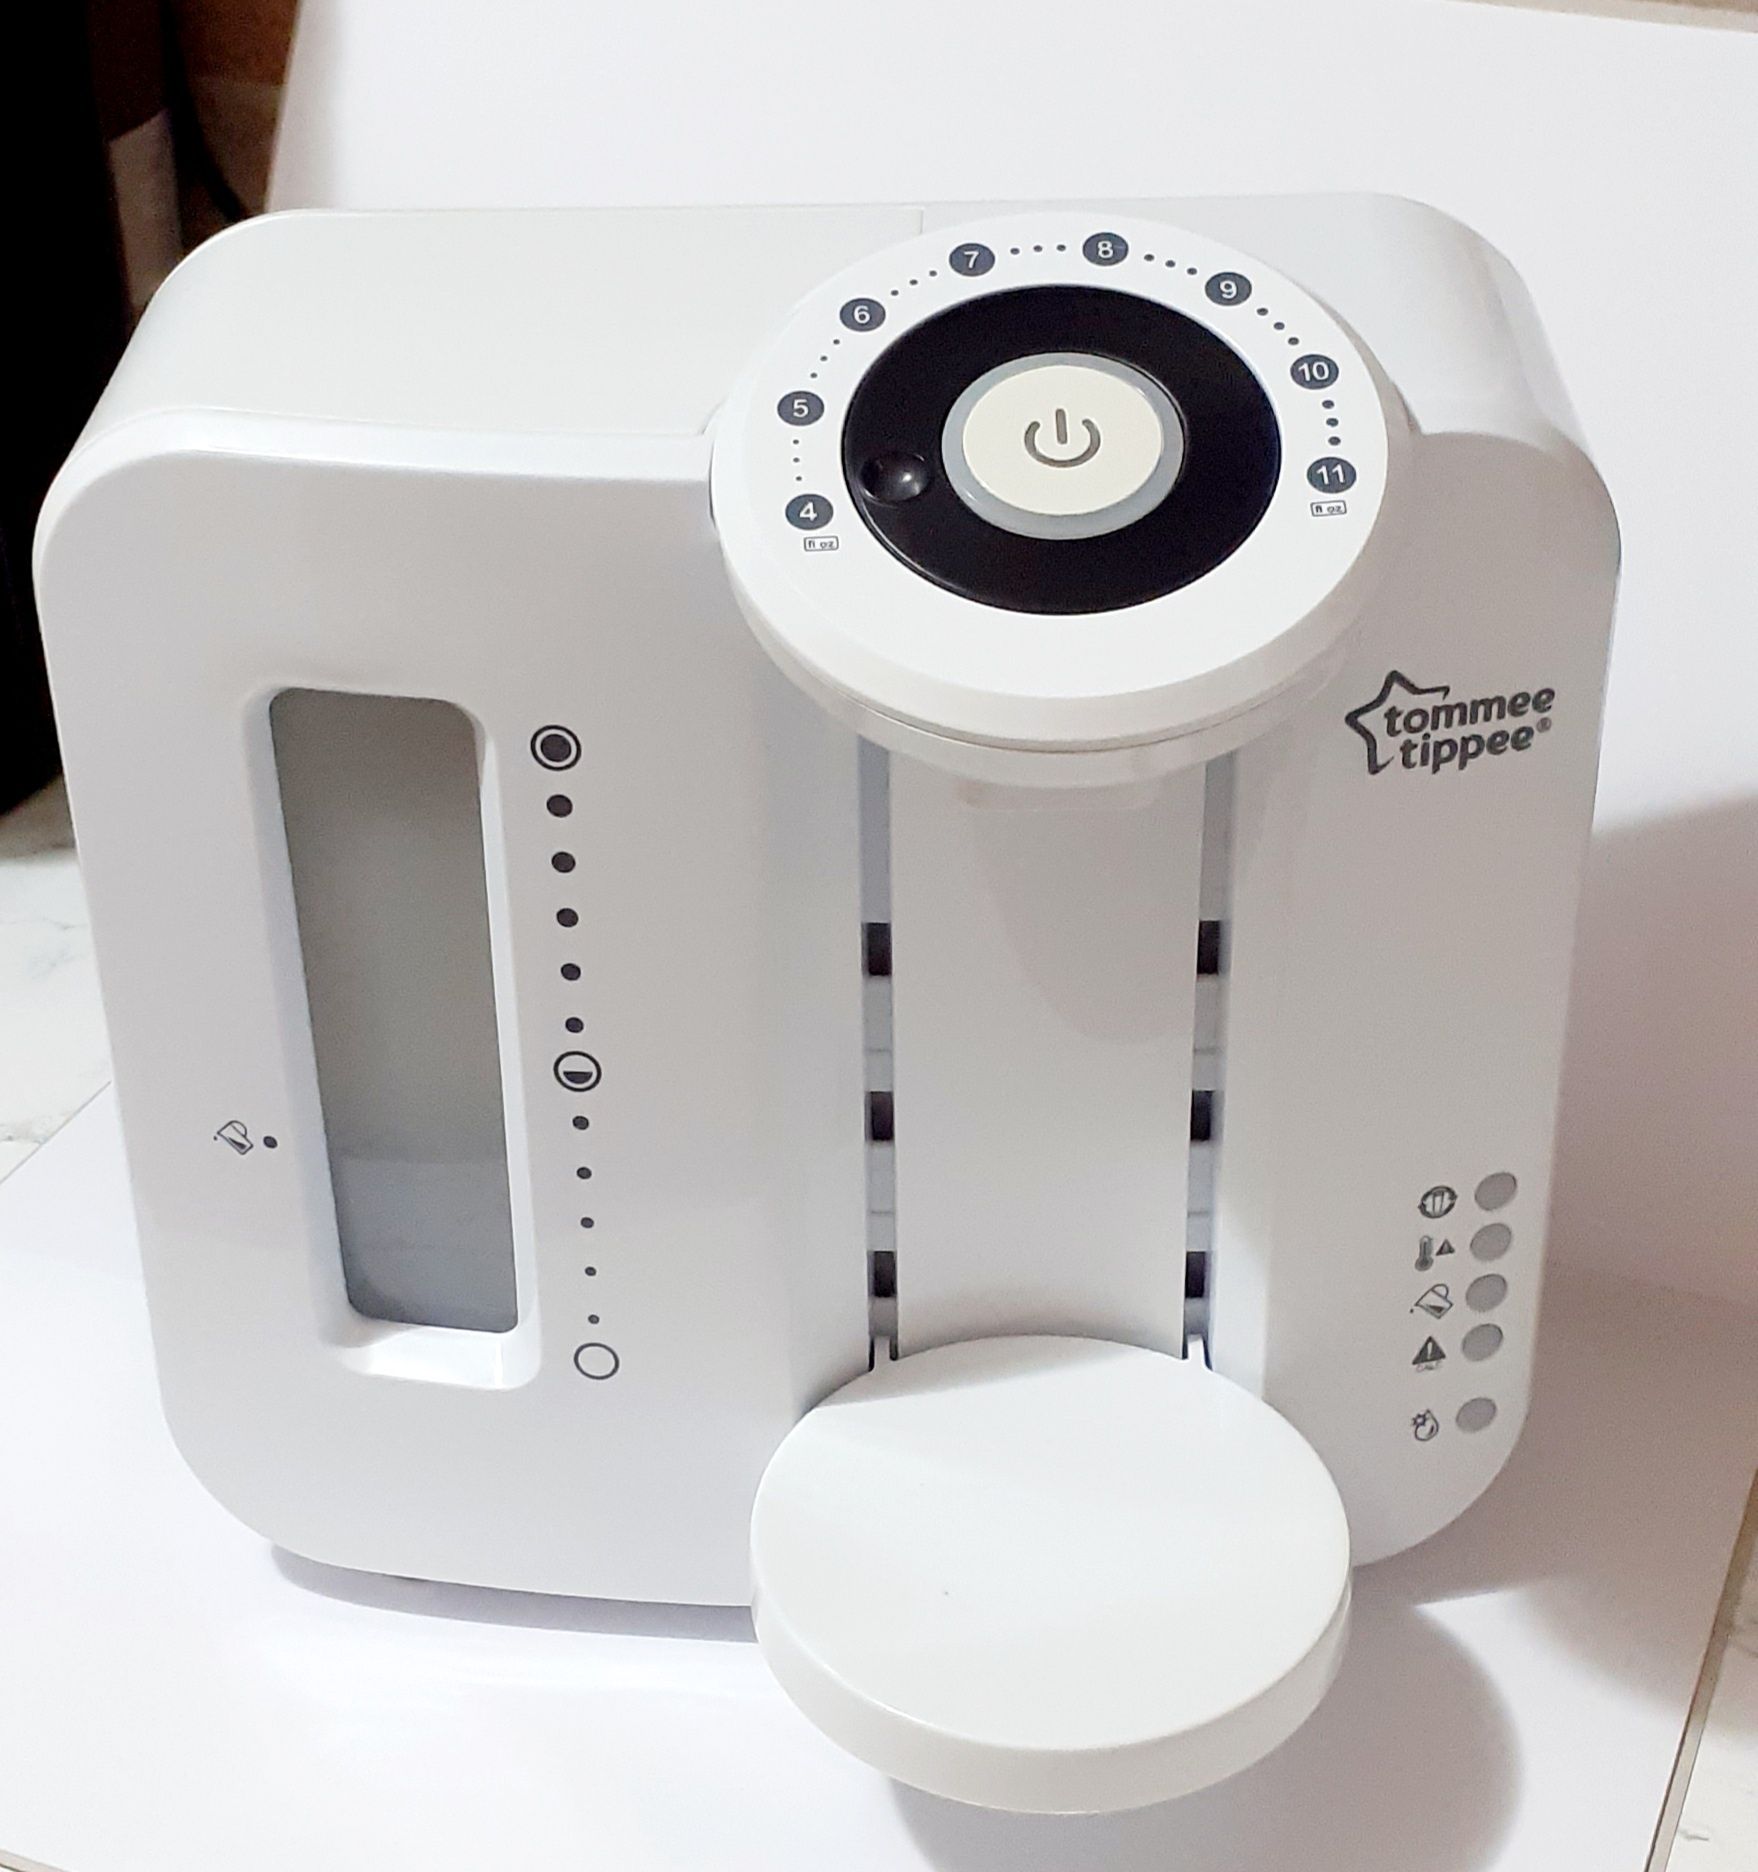 Tommee Tippee Perfect Prep Day & Night